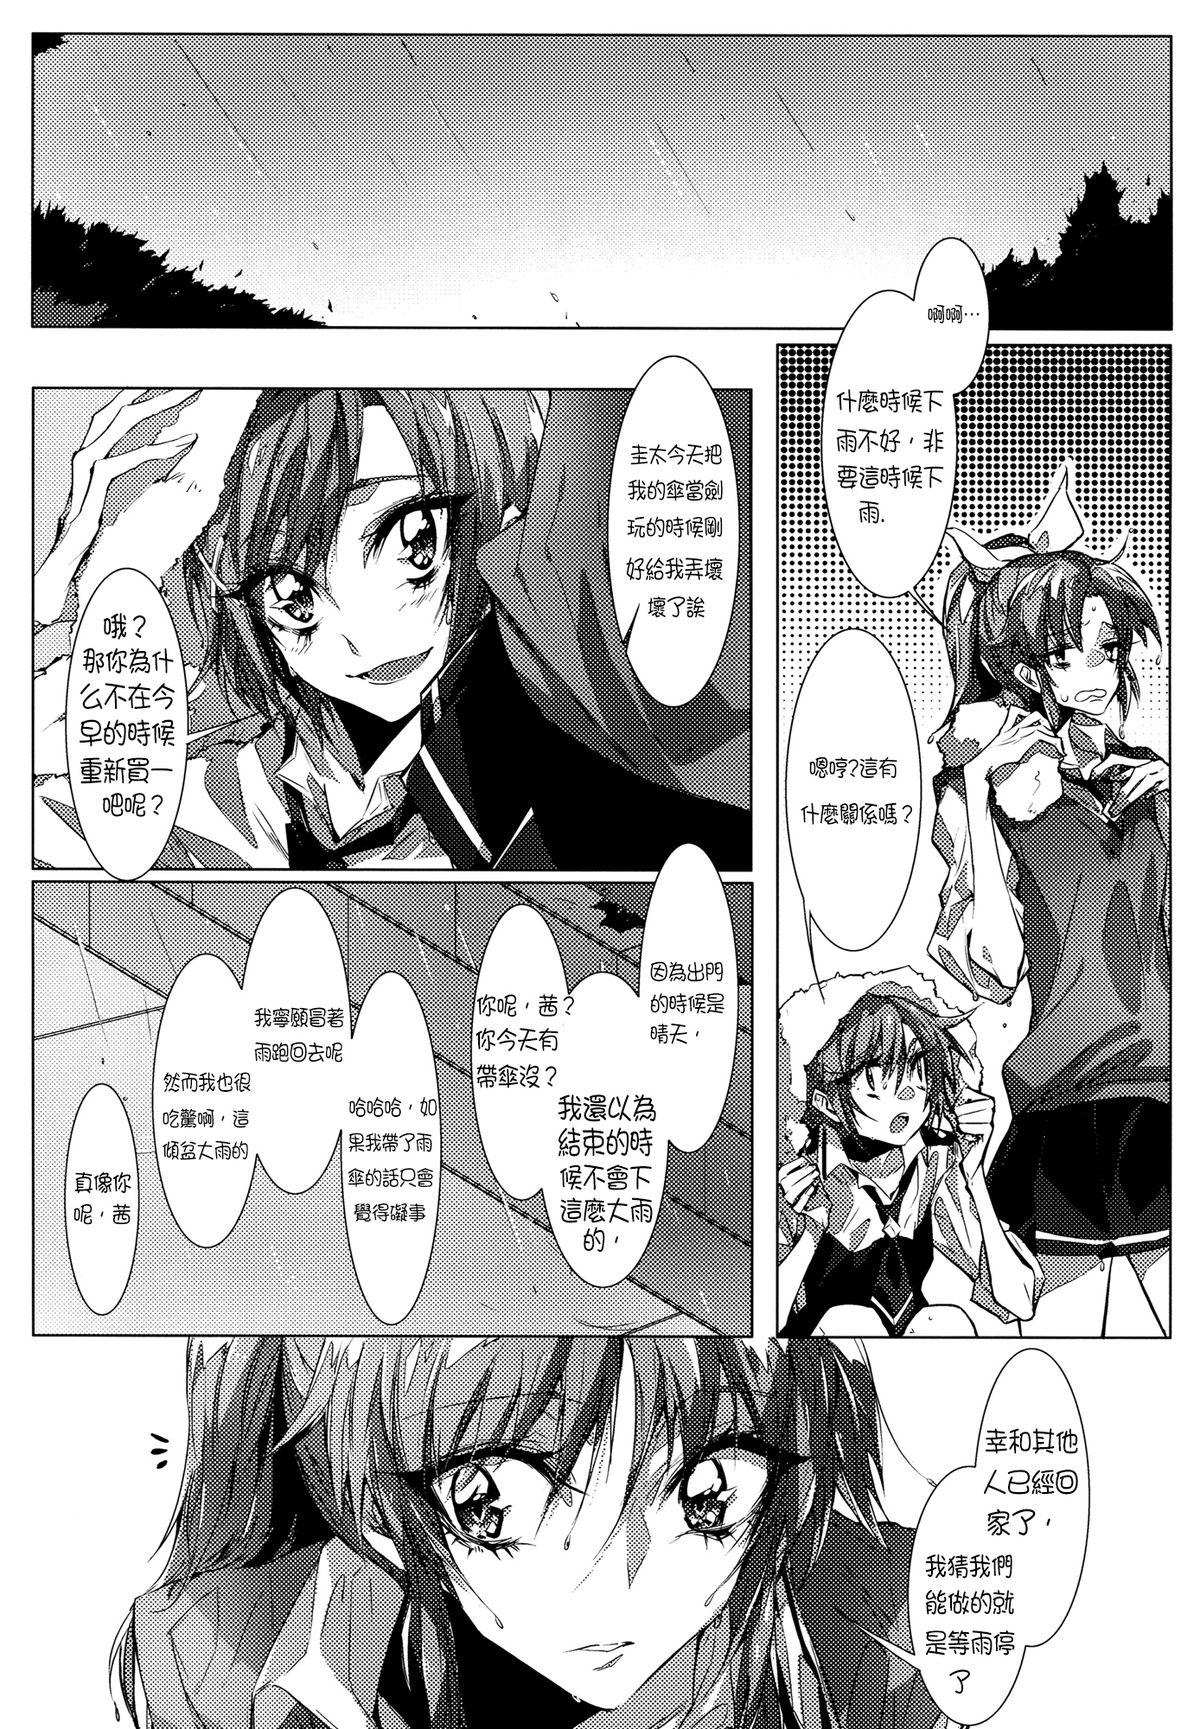 Kissing Houkago 23 | After School 23 - Smile precure Thai - Page 3